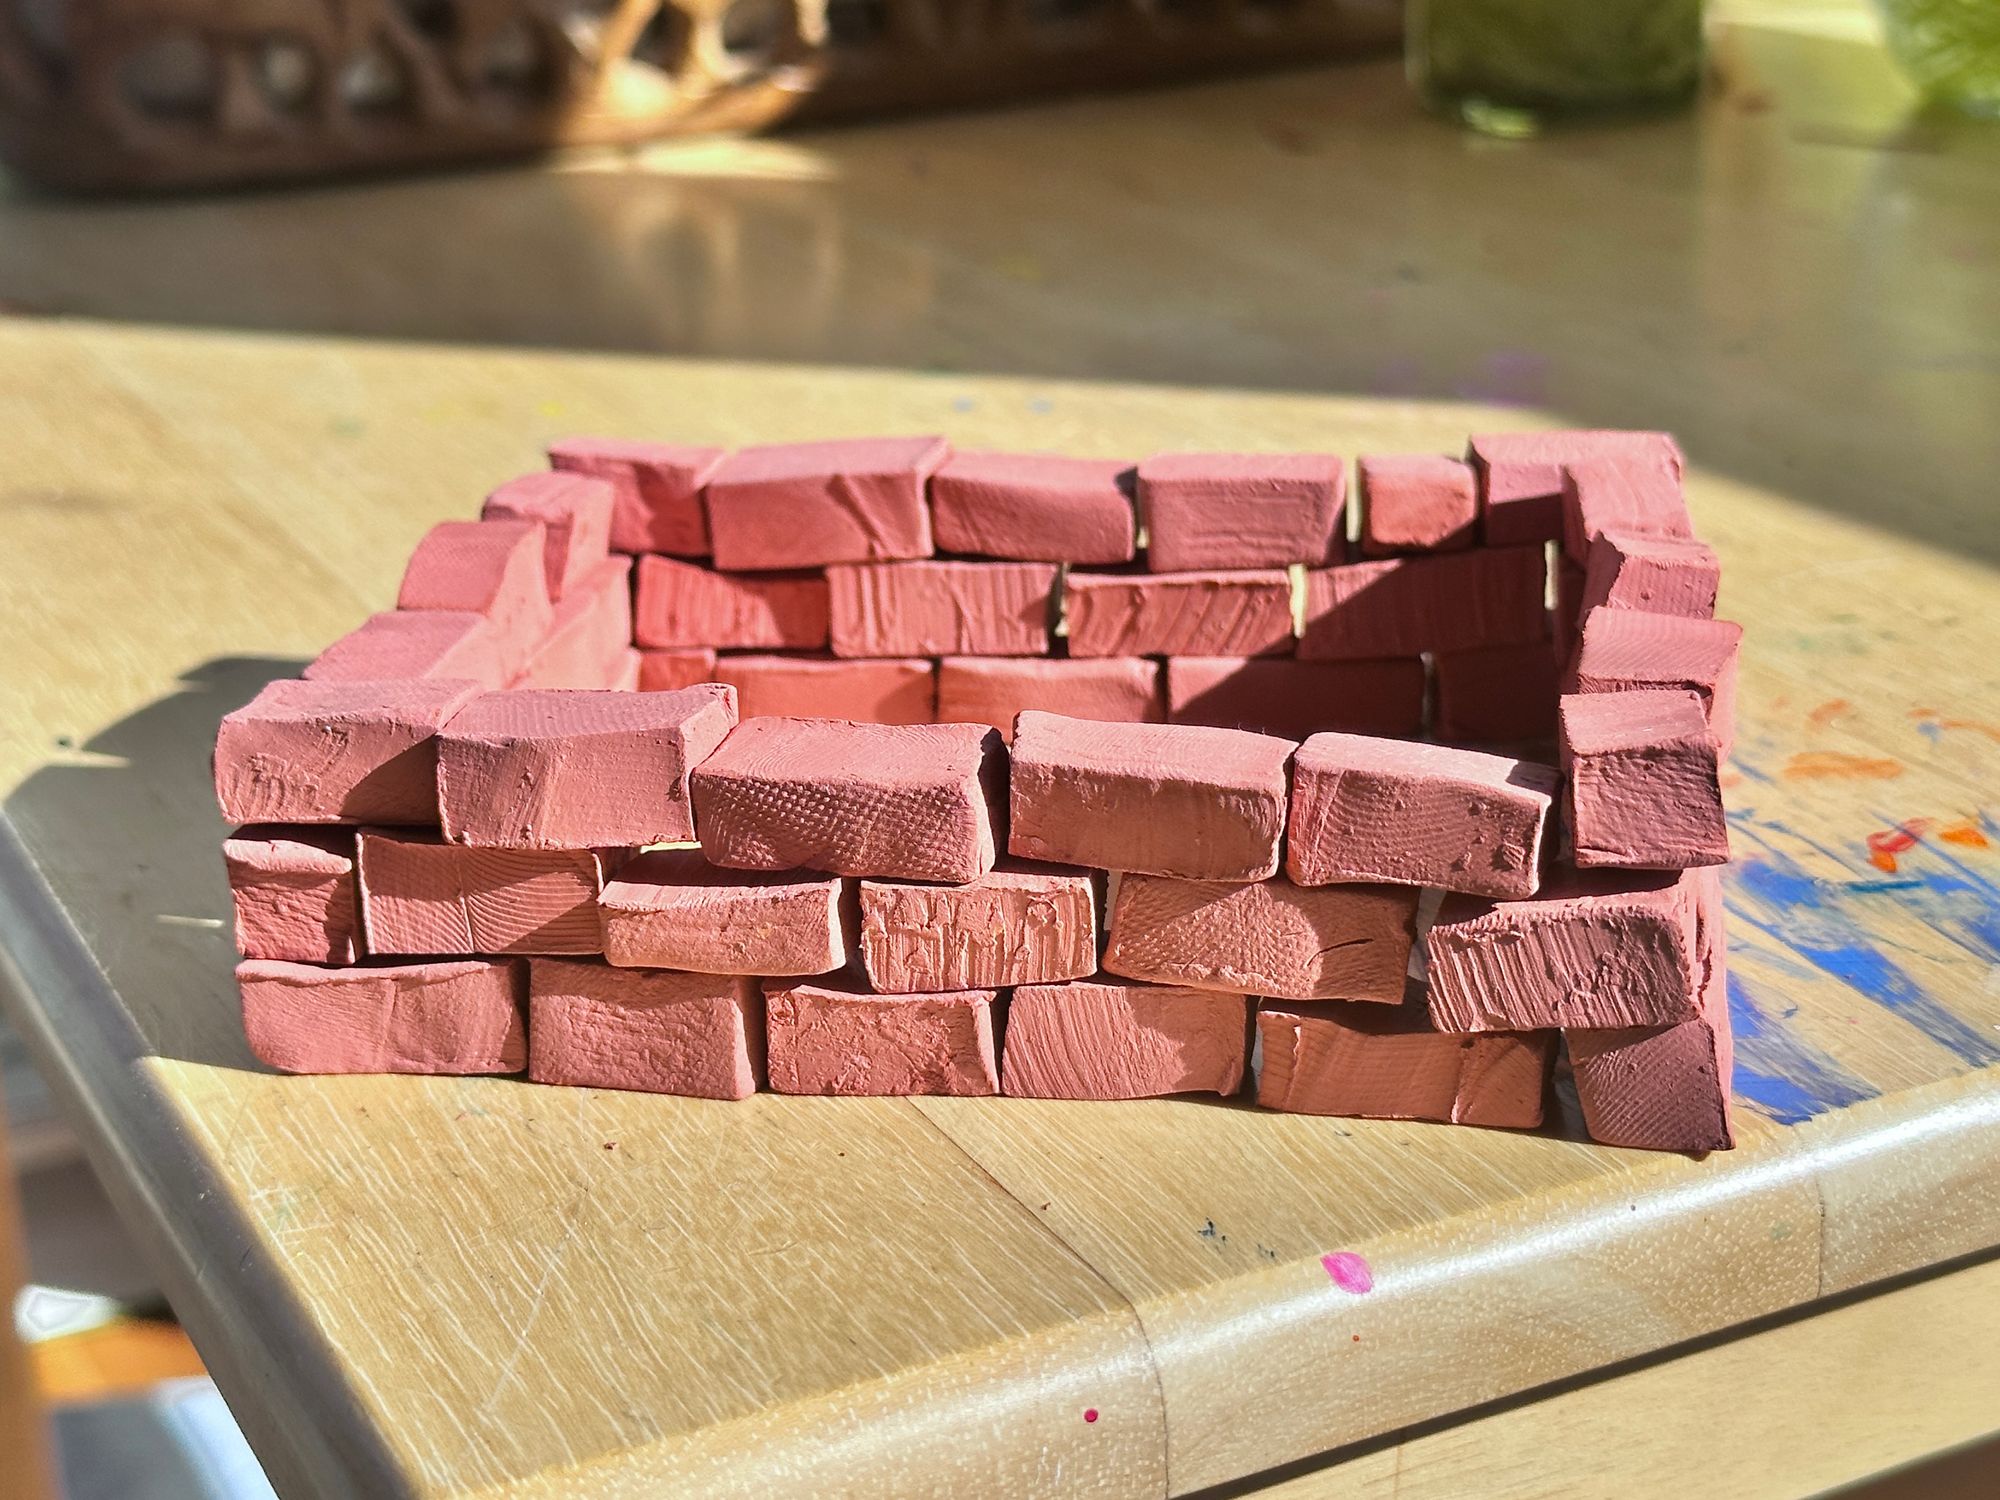 Making Miniature Bricks (Or How I Almost Lost My Mind)